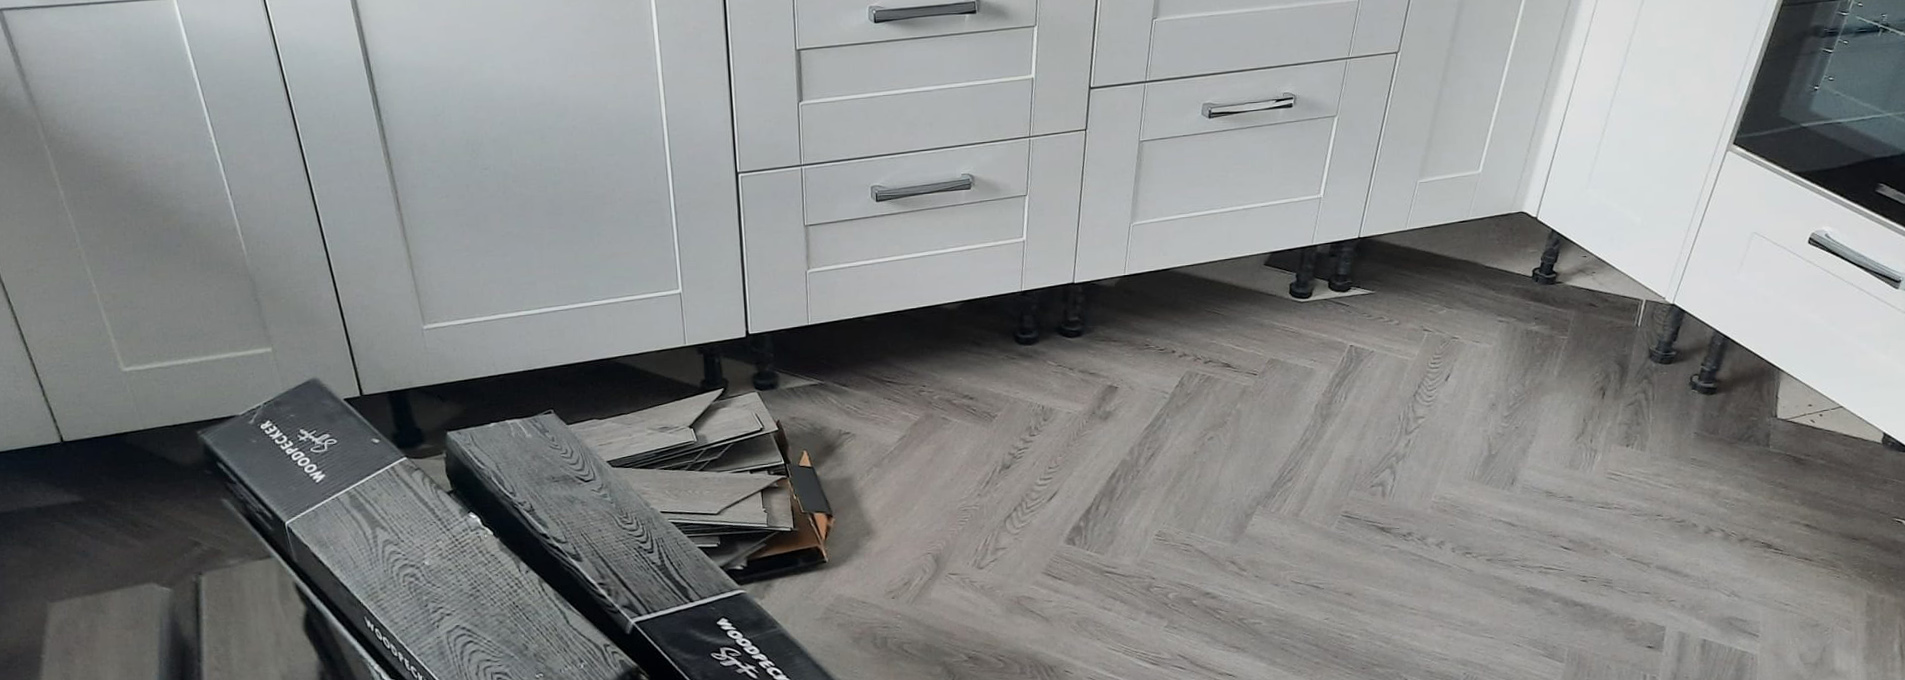 You Have to See This Kitchen Floor and Our Experience with Floor